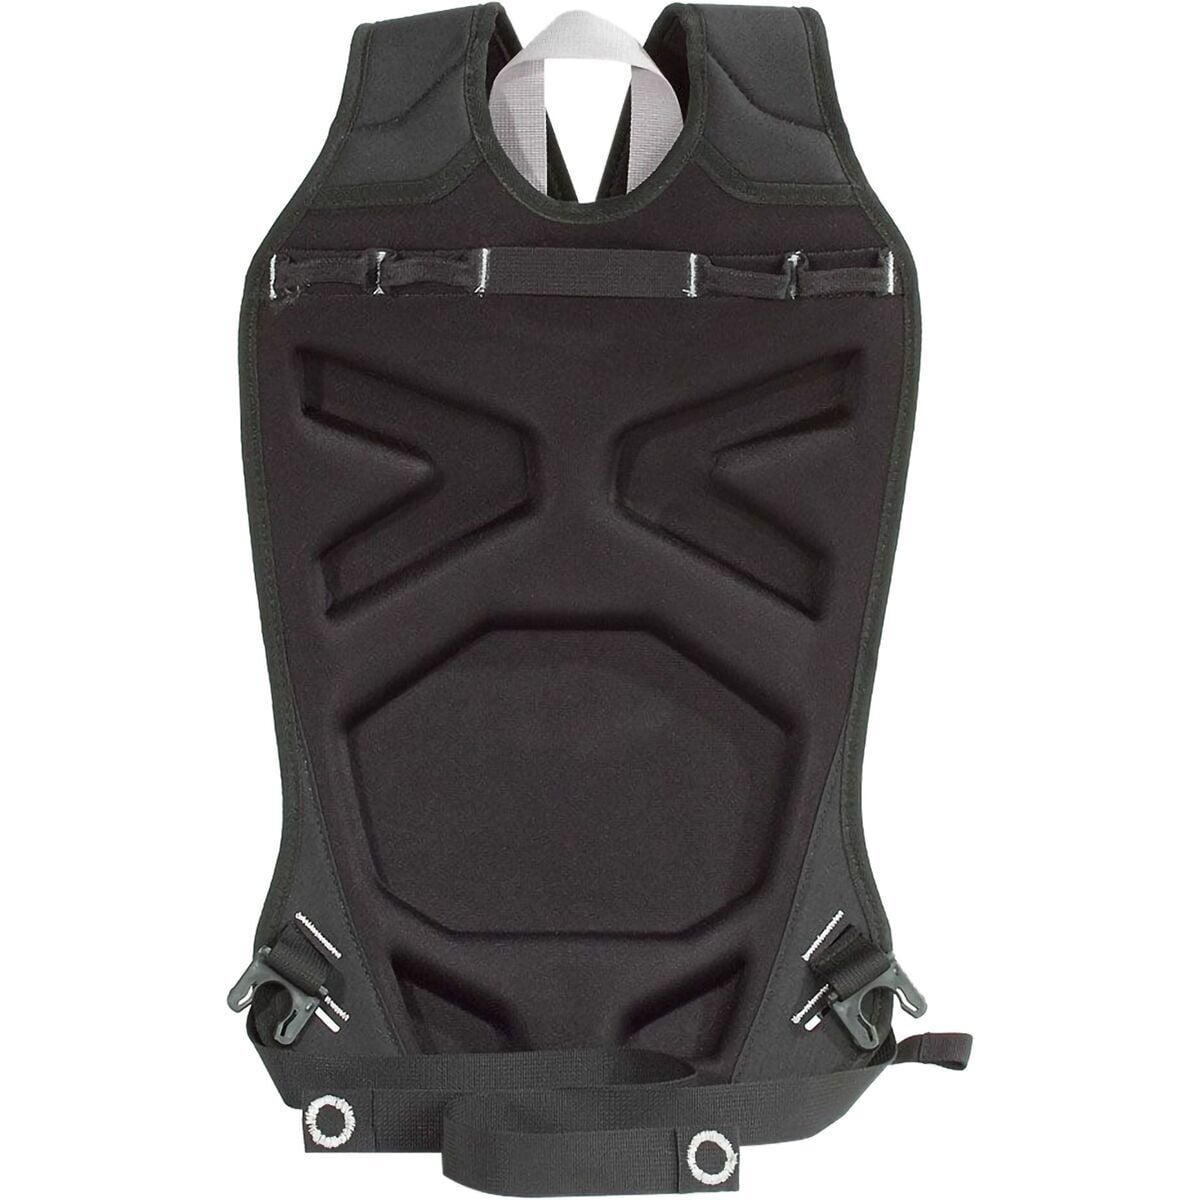 Ortlieb Pannier Carrying System